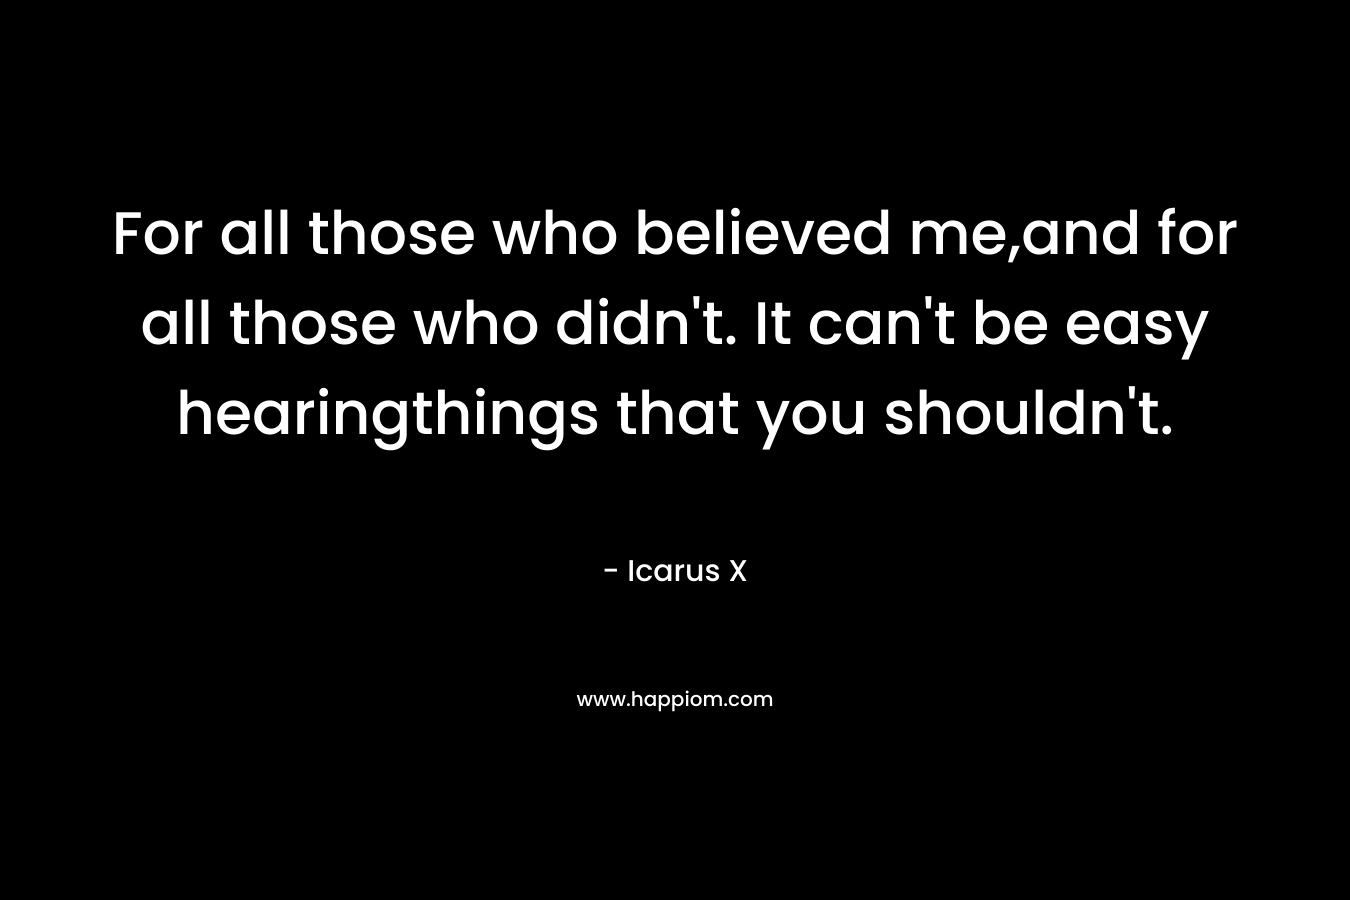 For all those who believed me,and for all those who didn’t. It can’t be easy hearingthings that you shouldn’t. – Icarus X